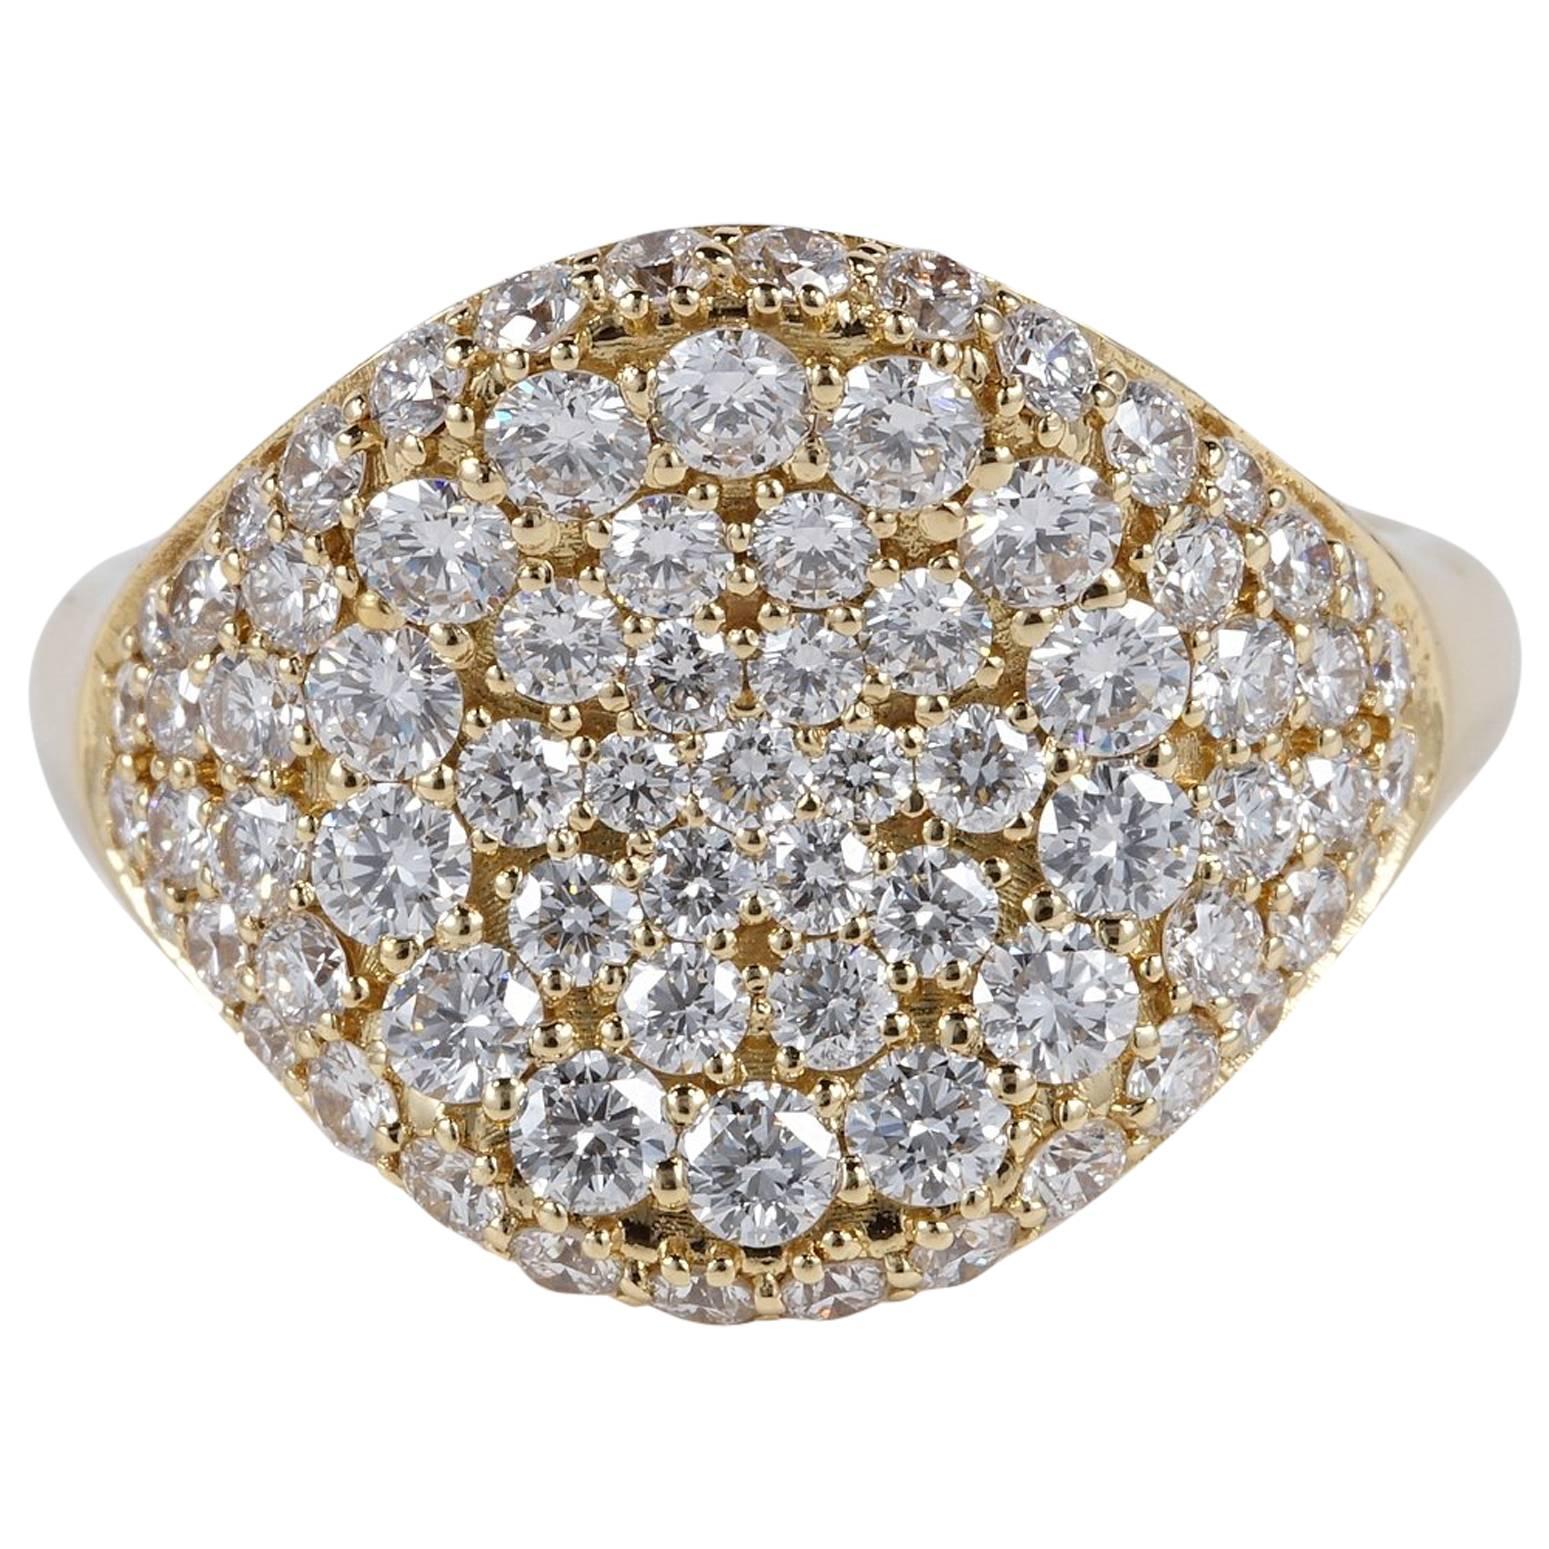 2.0 Carat Diamond Exclusive Signet Ring For Sale